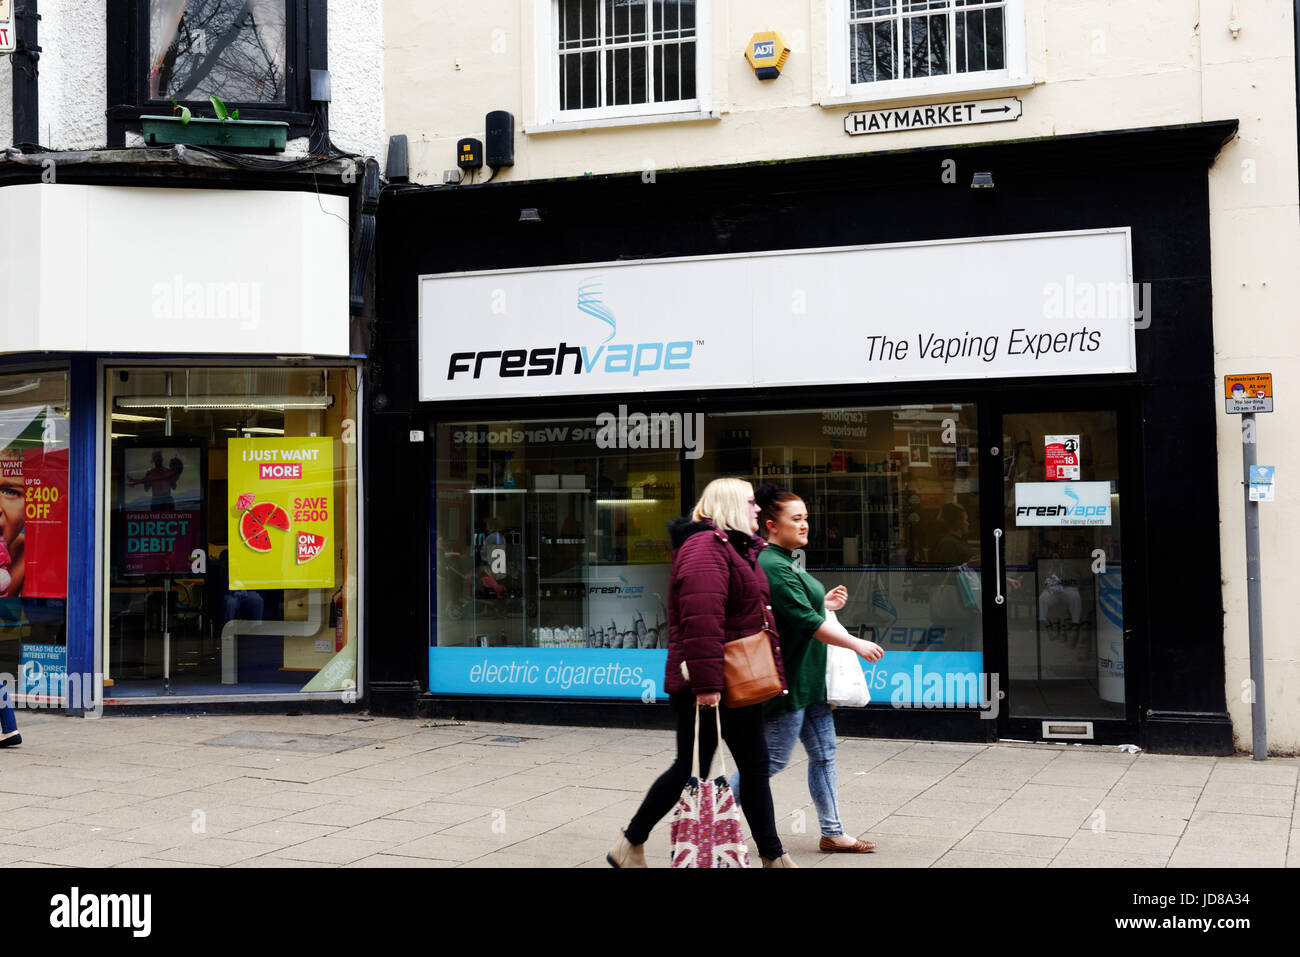 People passing a Fresh Vape vaping shop in Norwich, Norfolk, England Stock Photo